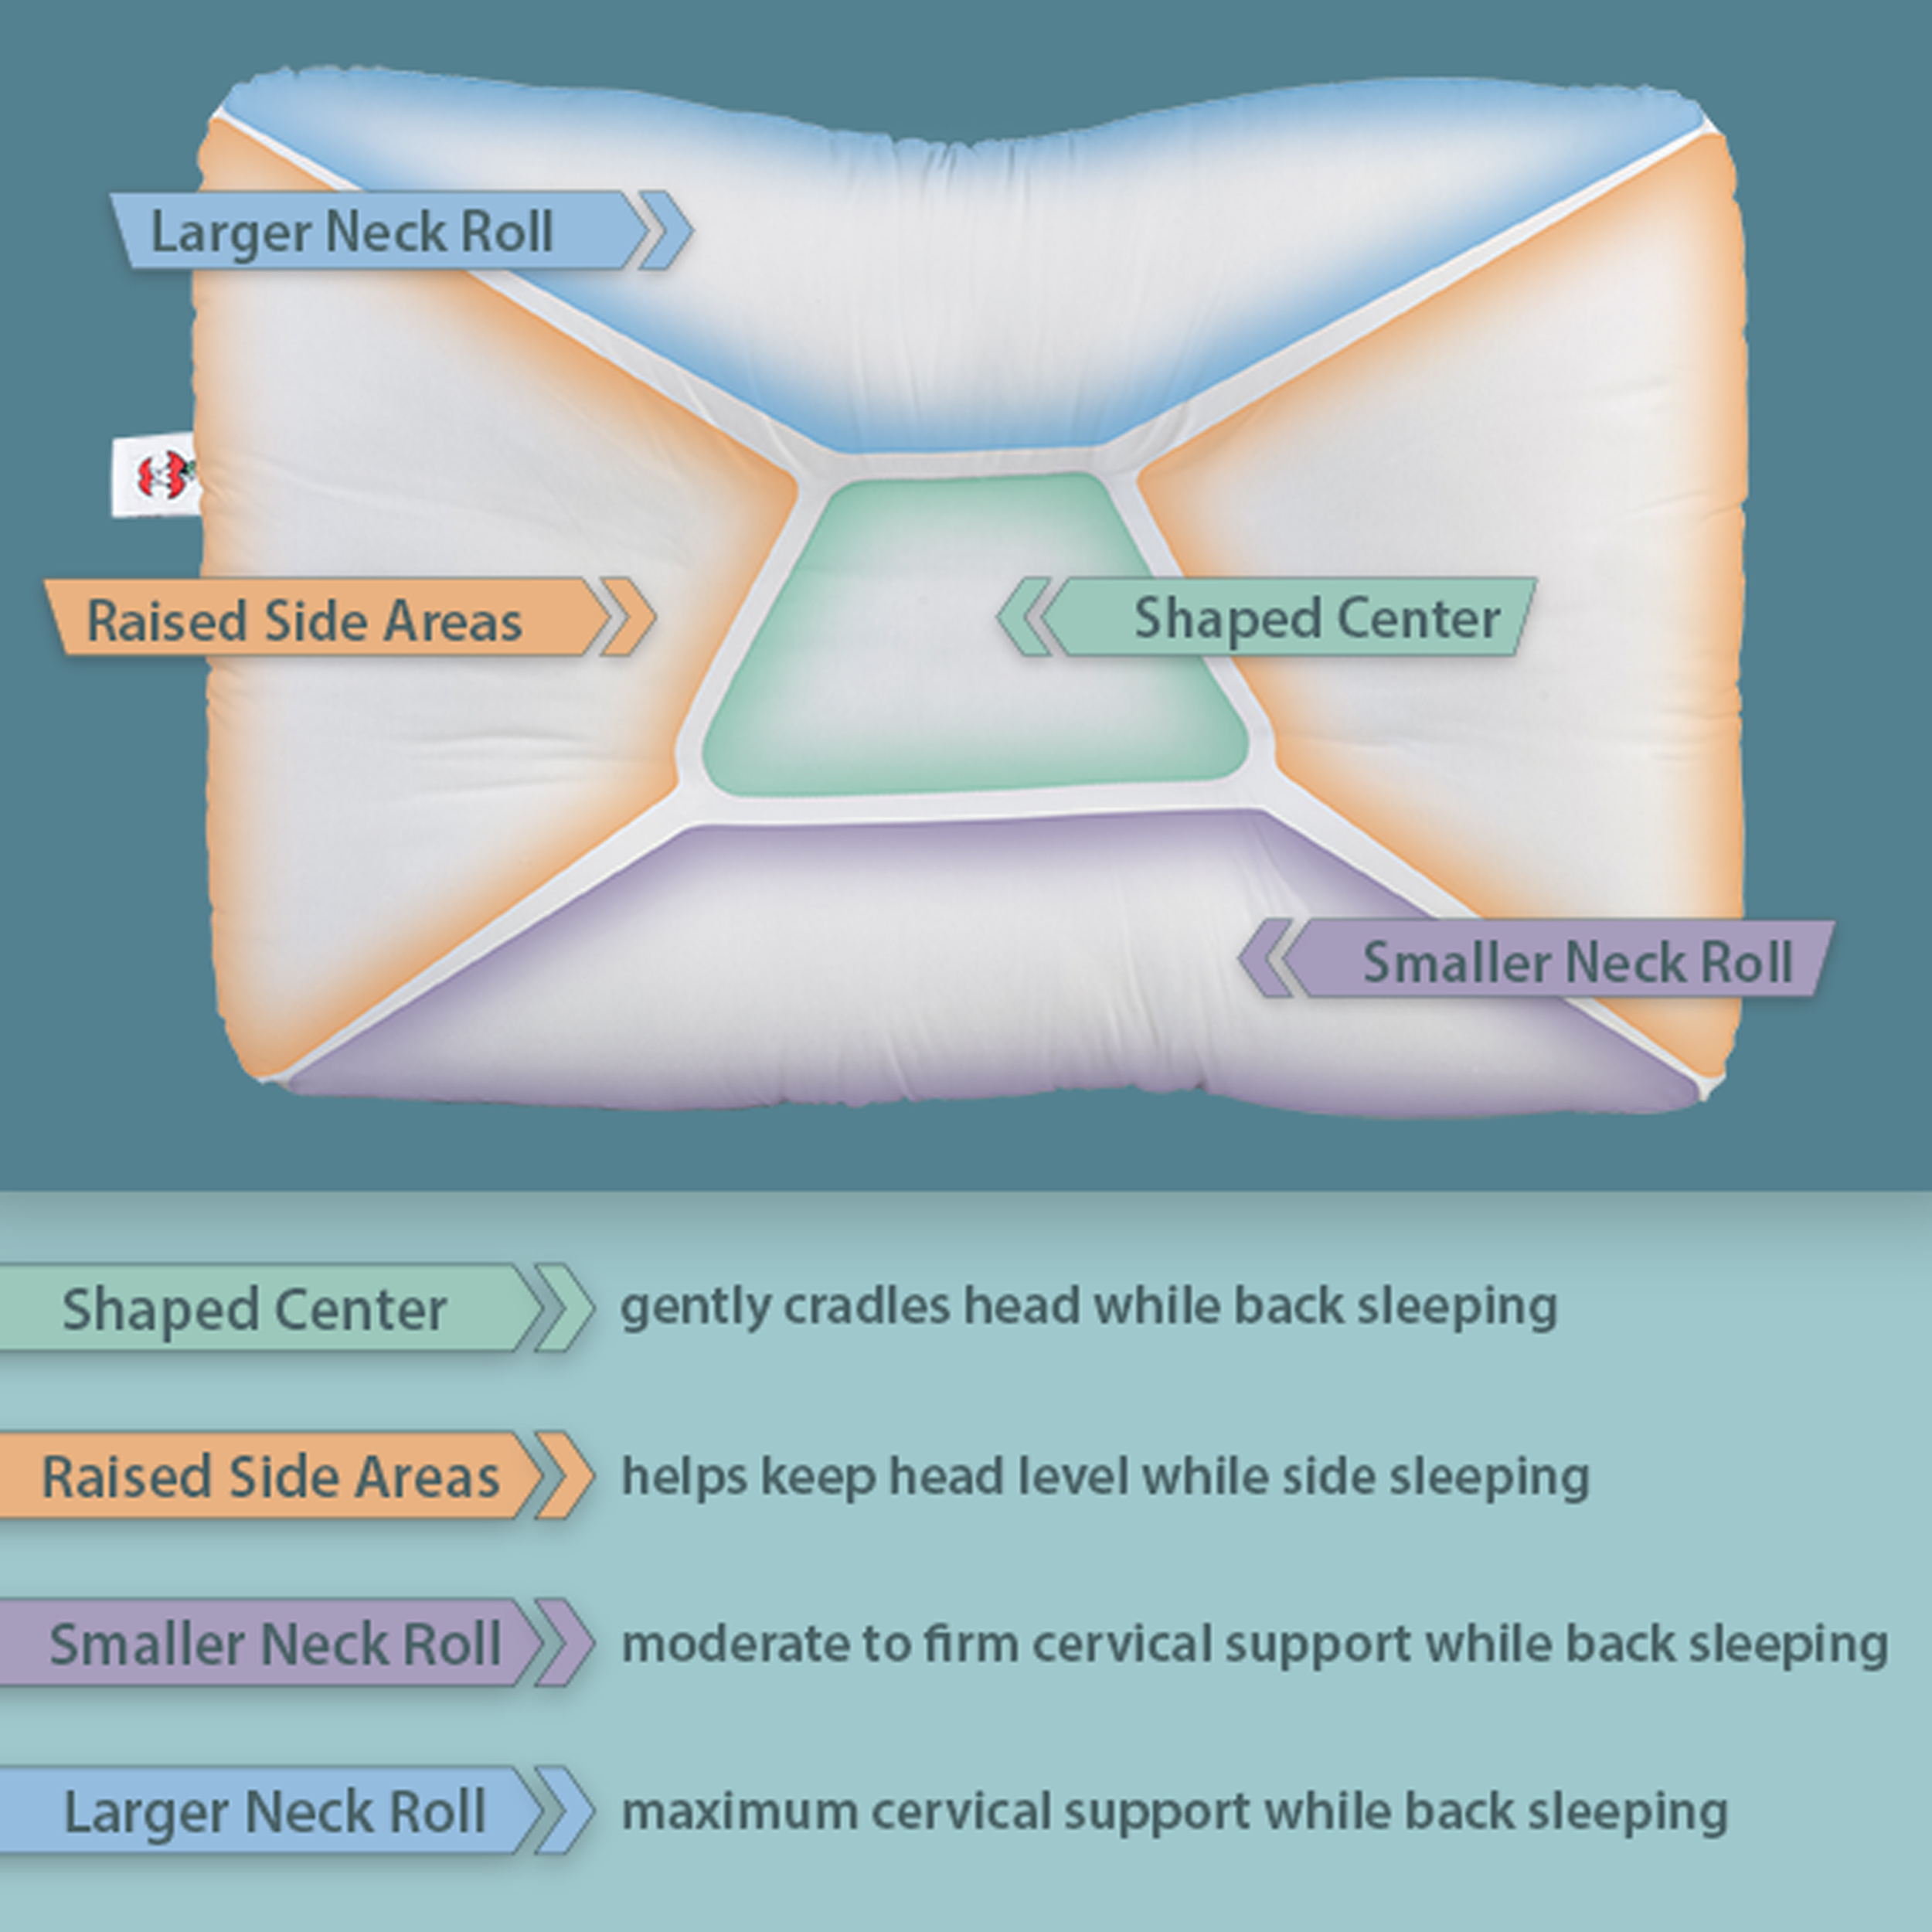 Core Products Tri-Core Cervical Support Pillow for Neck, Shoulder, and Back Pain Relief; Ergonomic Orthopedic Contour Bed Pillow for Back and Side Sleepers; Assembled in USA - Firm, Full Size, 2 Pack - image 3 of 11